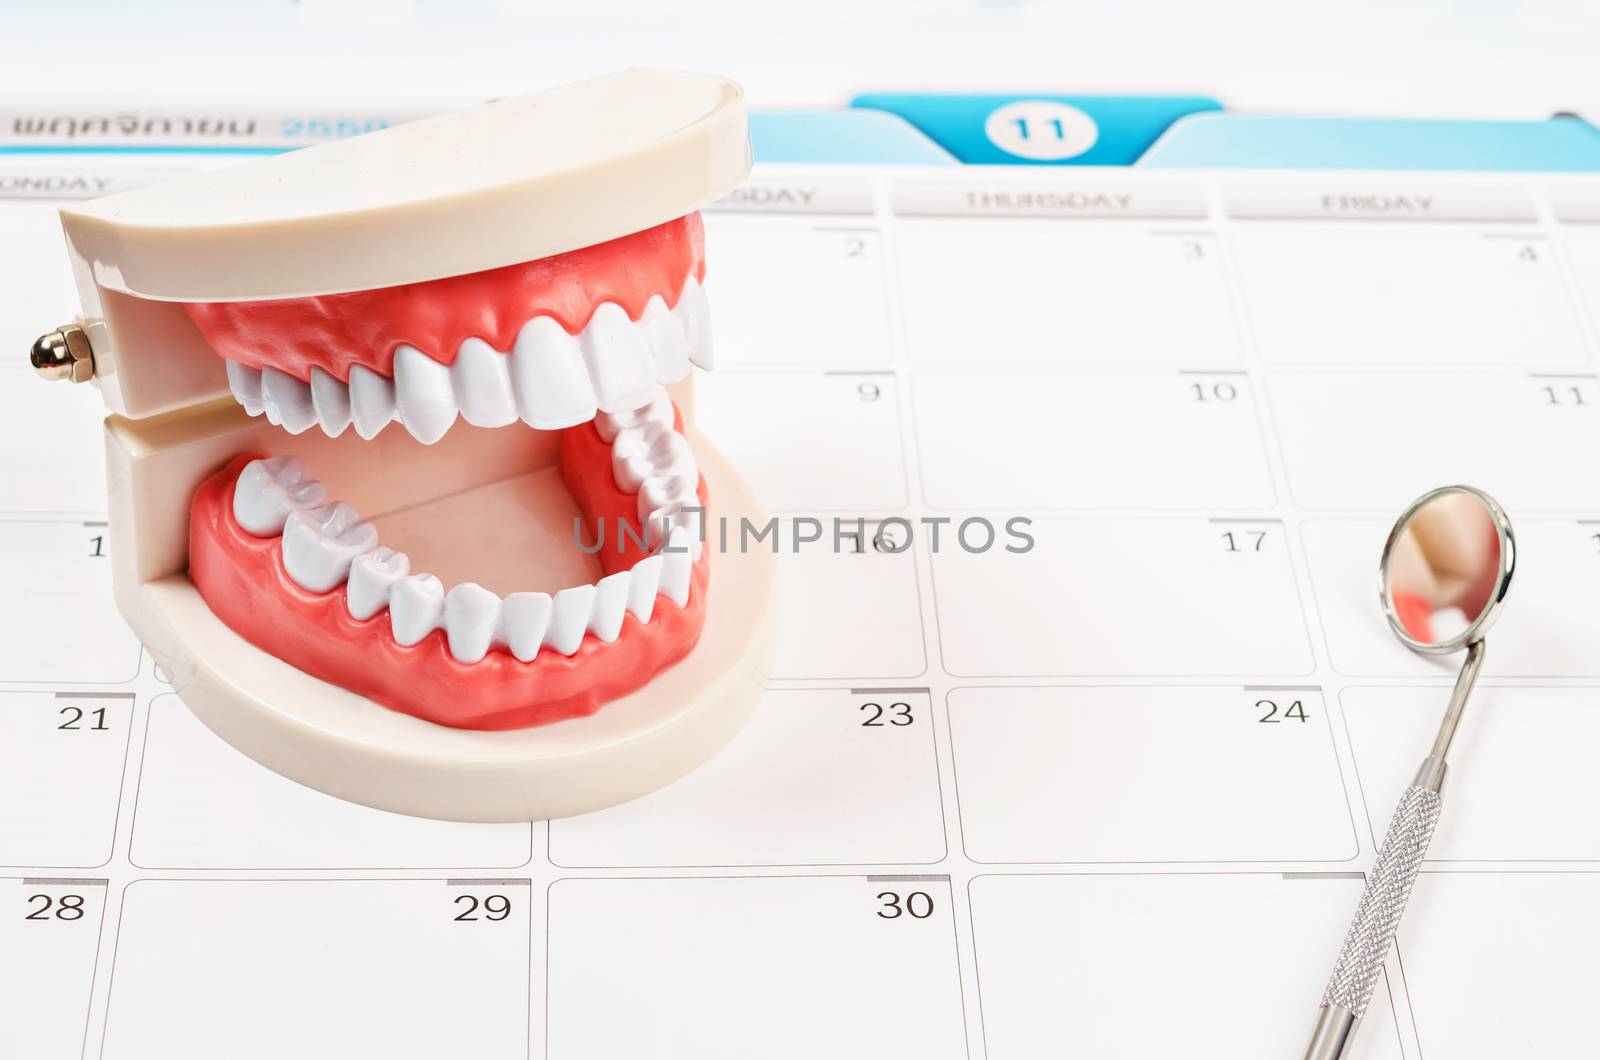 Calendar page and Dentist mirror tool and dentist demonstration teeth model.